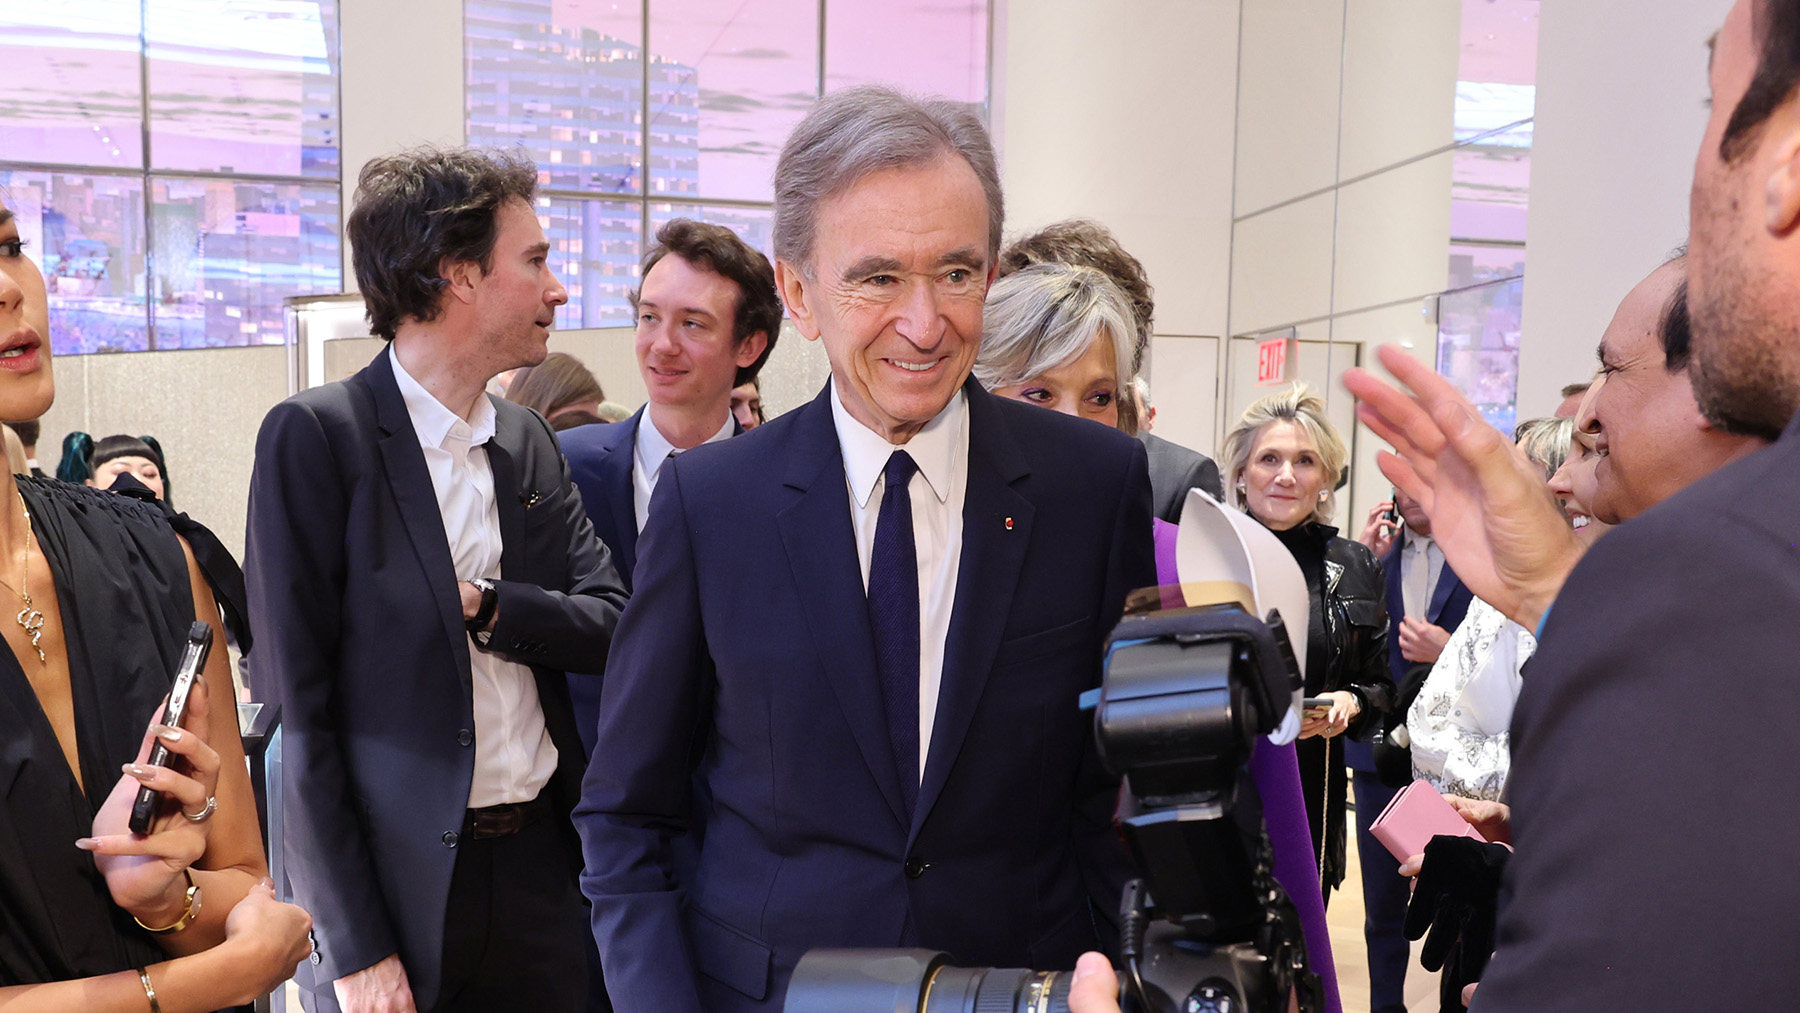 Chairman of LVMH, Bernard Arnault receives the Manager of the decade award  ( Manager de la Decennie ) during the BFM Awards 2020 ceremony at BFM  studio on November 30, 2020 in